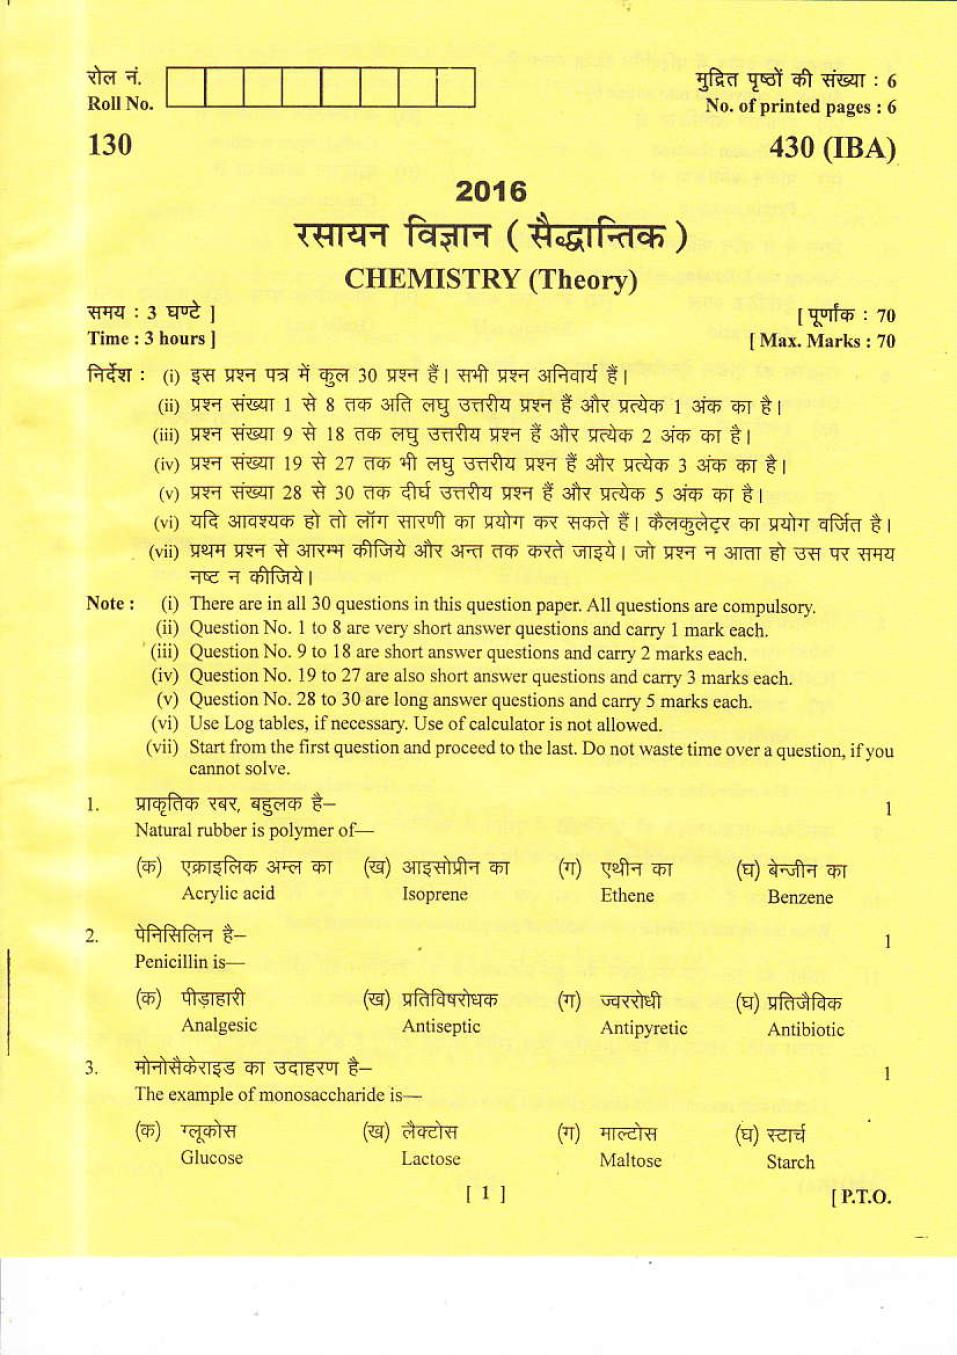 Uttarakhand Board Class 12 Question Paper 2016 for Chemistry - Page 1